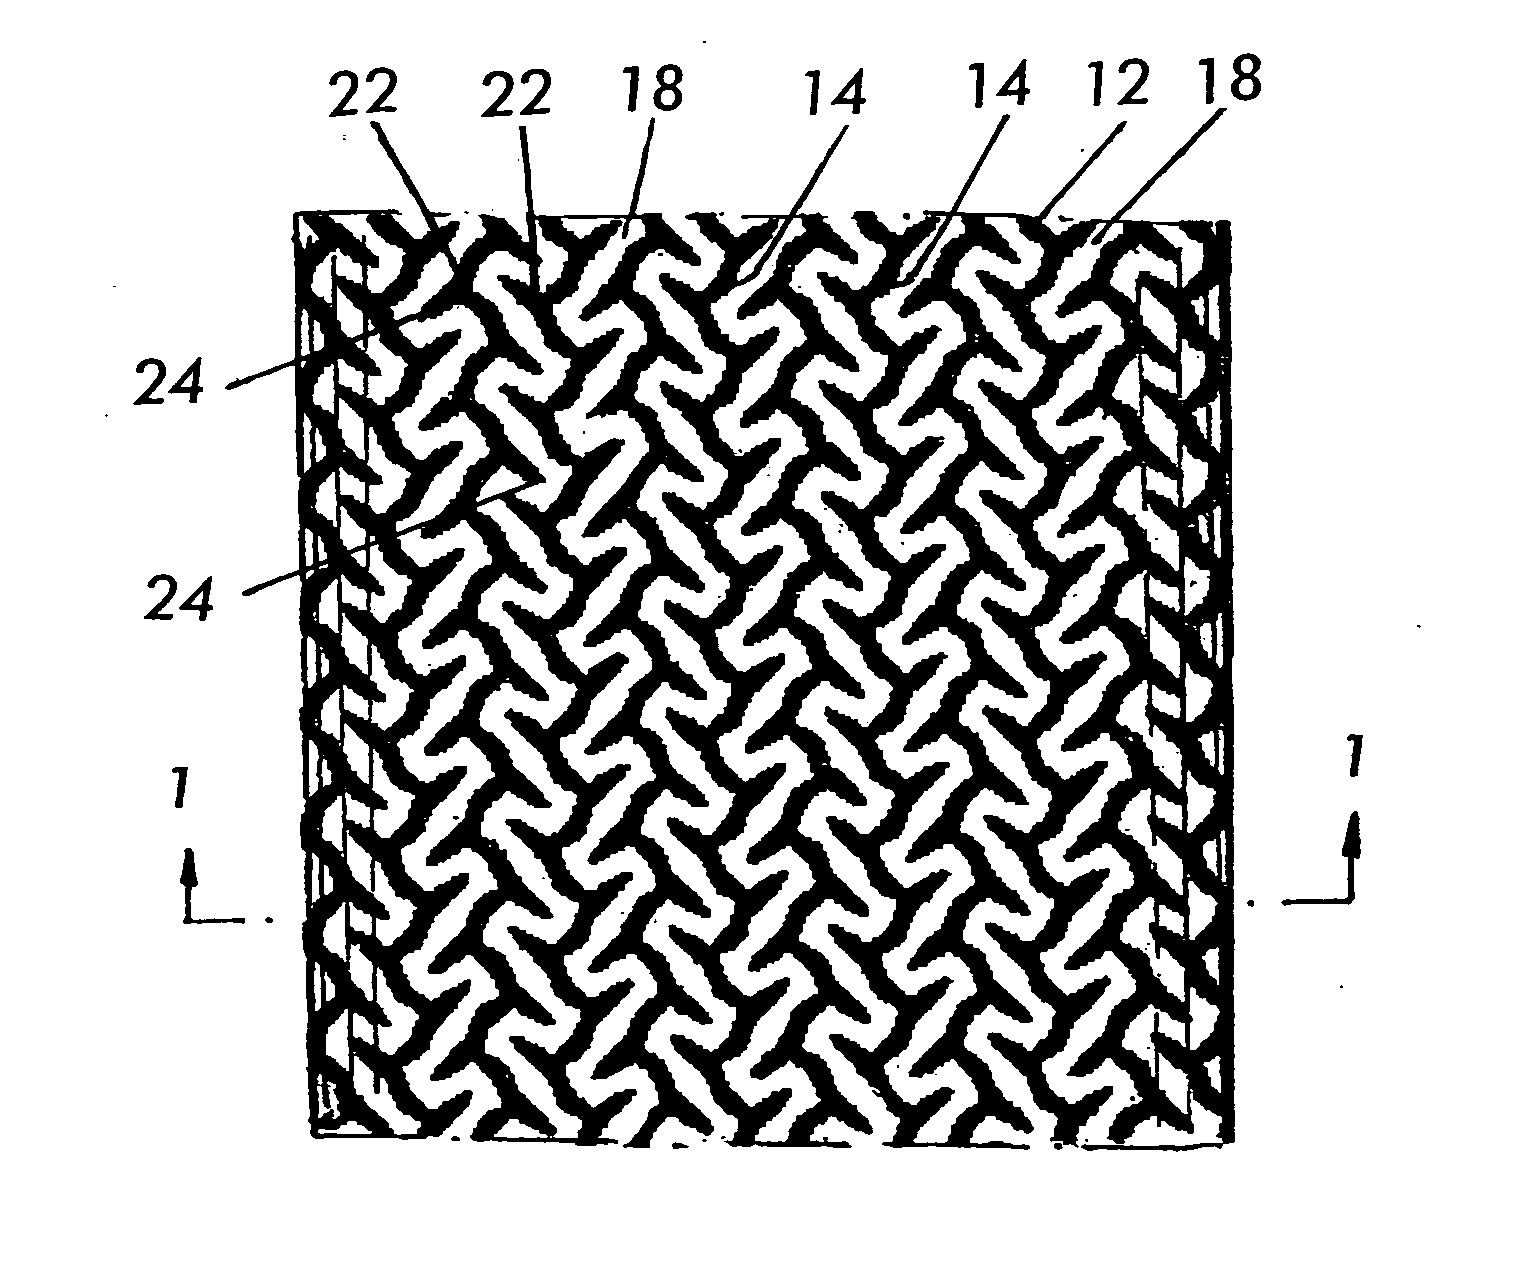 Micropattern grip surface